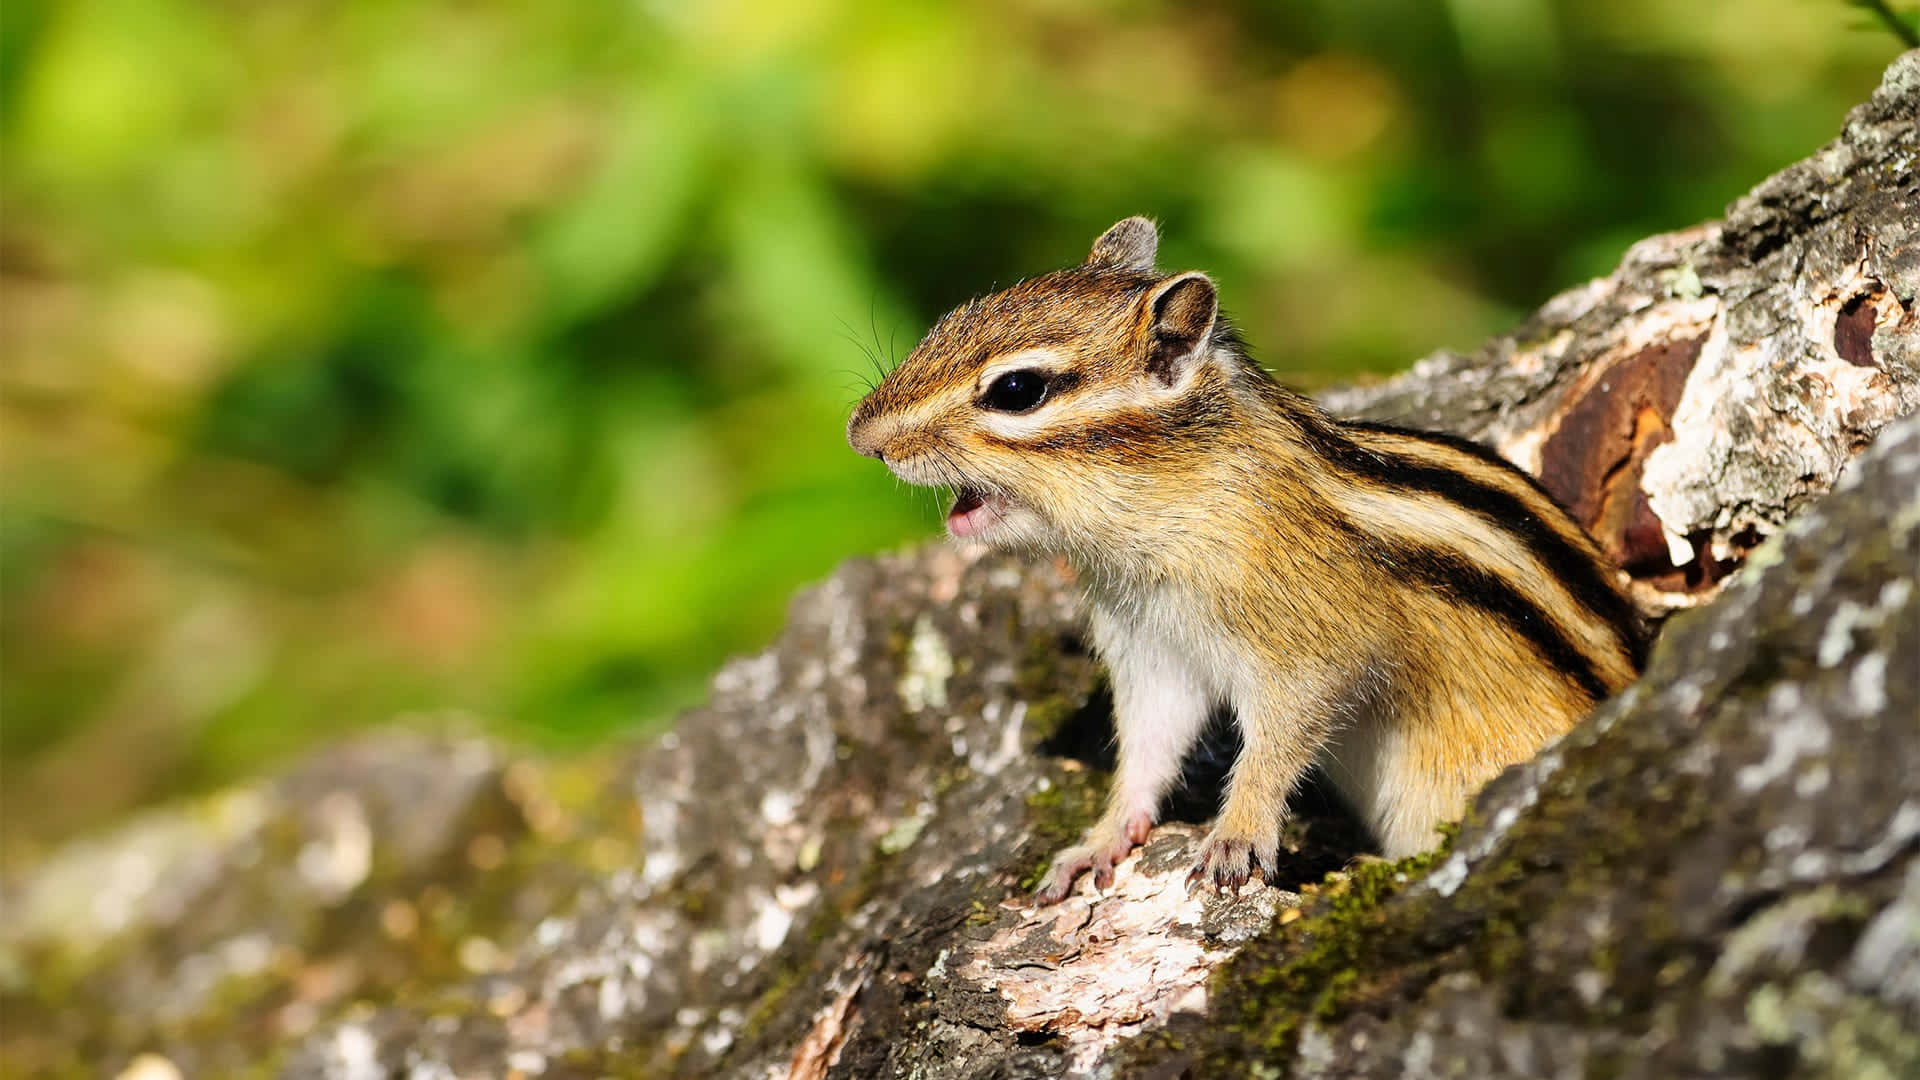 “A cheeky chipmunk looks for its next snack”